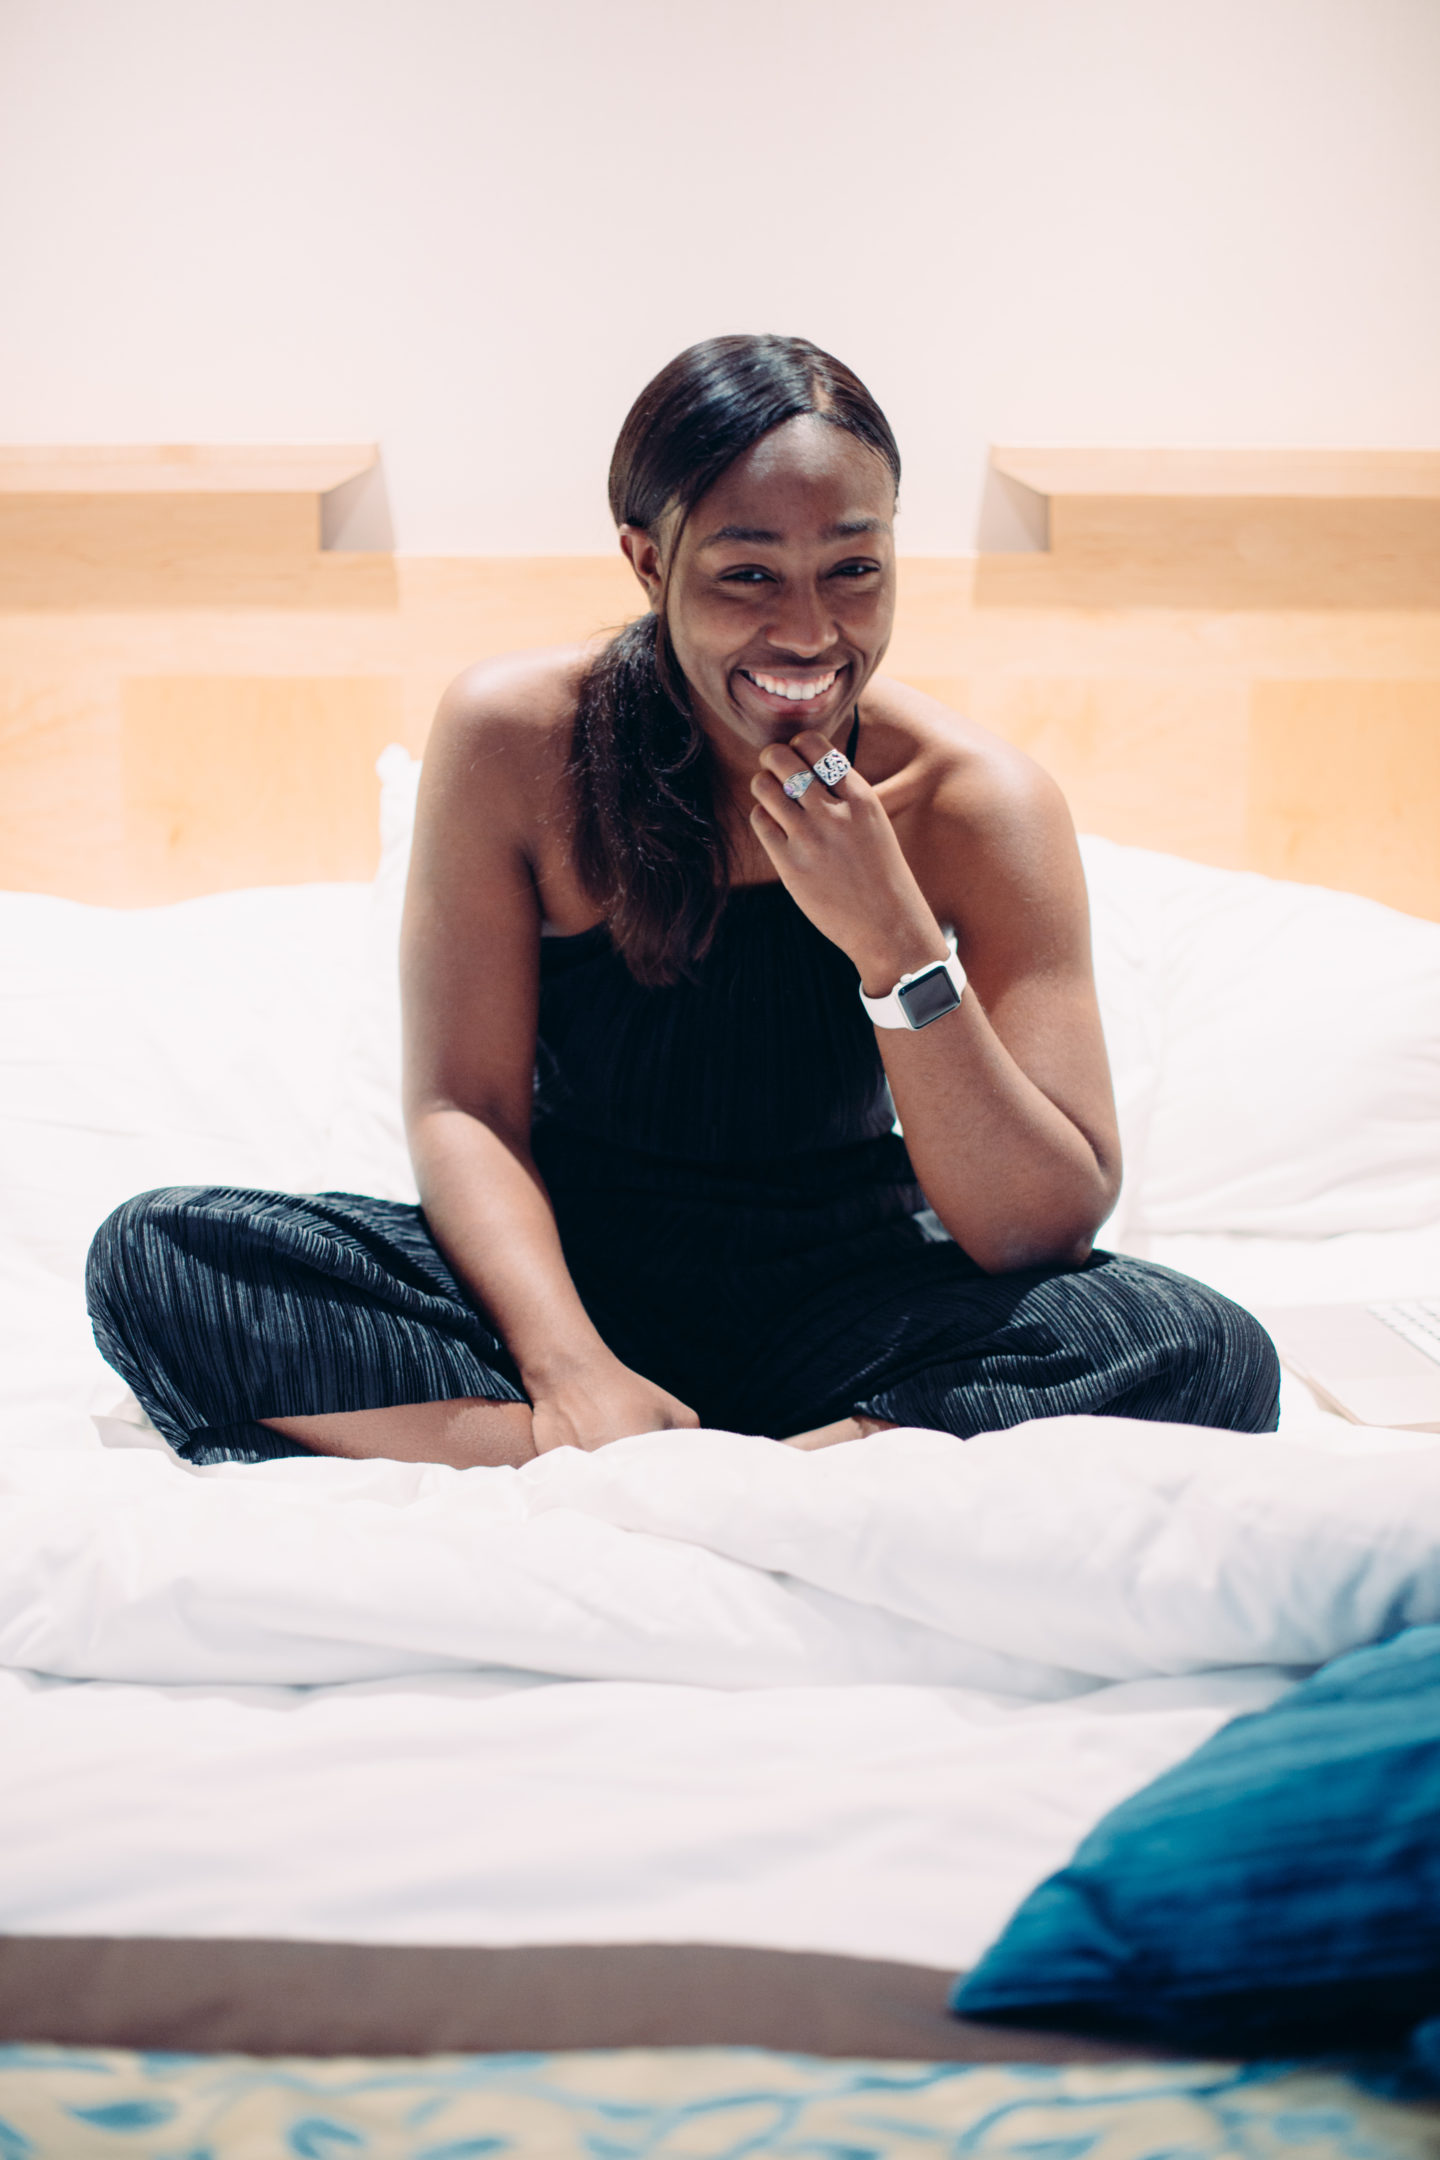 Jordan Taylor C - A Much-Needed Rest with the Amba Hotel in Charing Cross, london hotels, charing cross london, black women travel blog, black female travel blogger